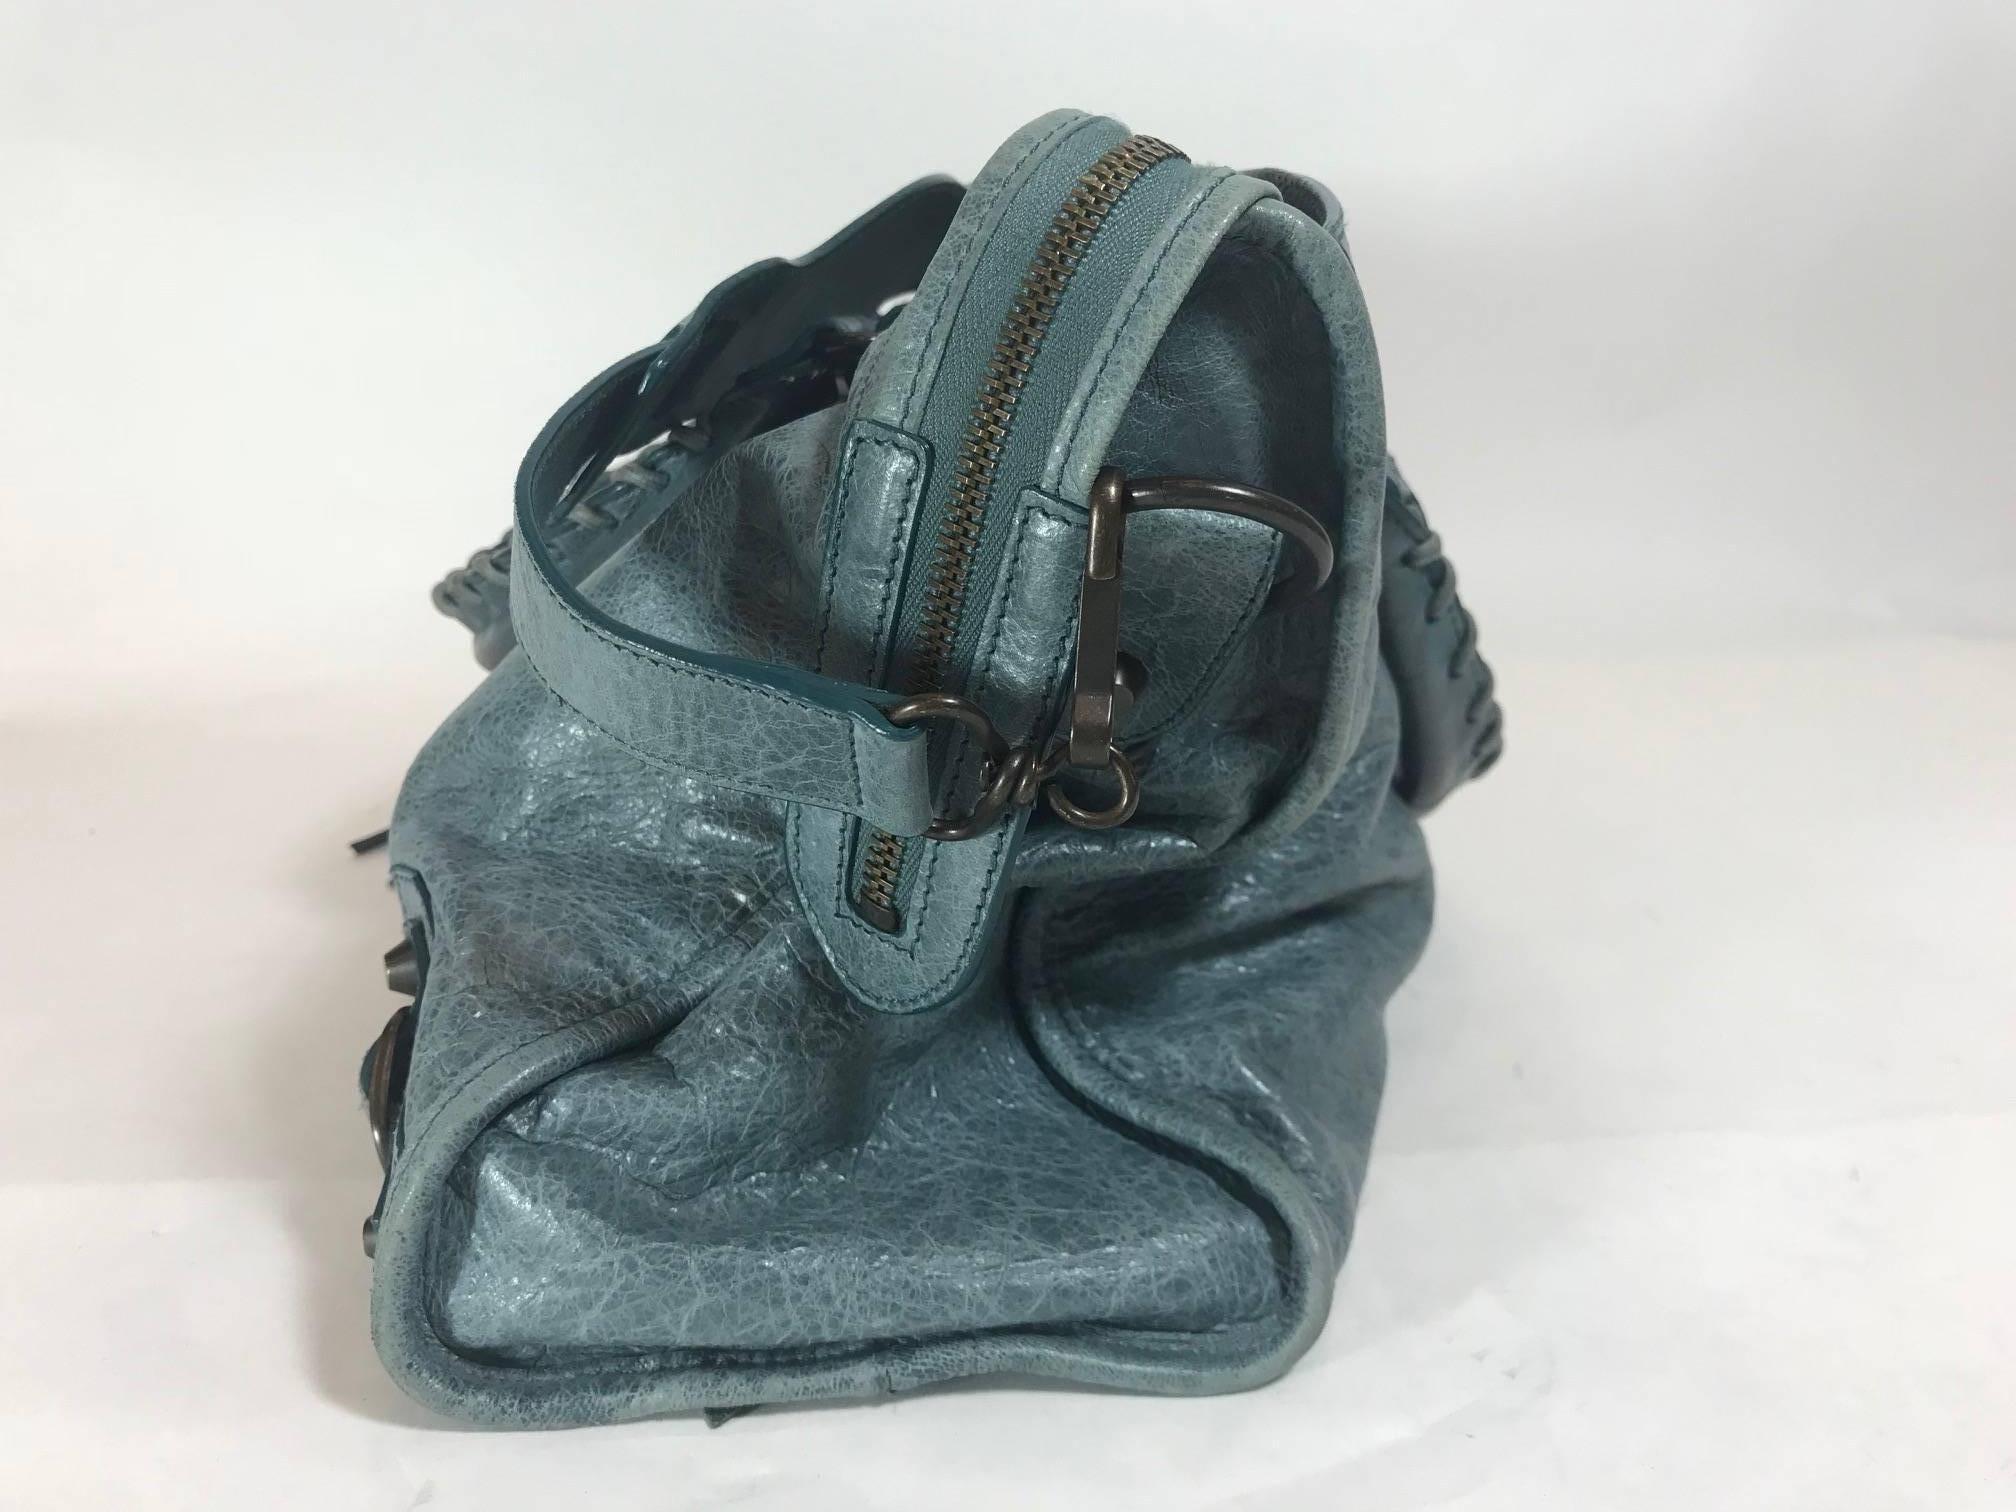 Cerulean leather. Brass hardware. Dual rolled handles featuring whipstitched detail. Detachable flat shoulder strap. Single exterior zip pocket. Stud and buckle embellishments throughout. Black woven lining. Single zip pocket at interior wall and